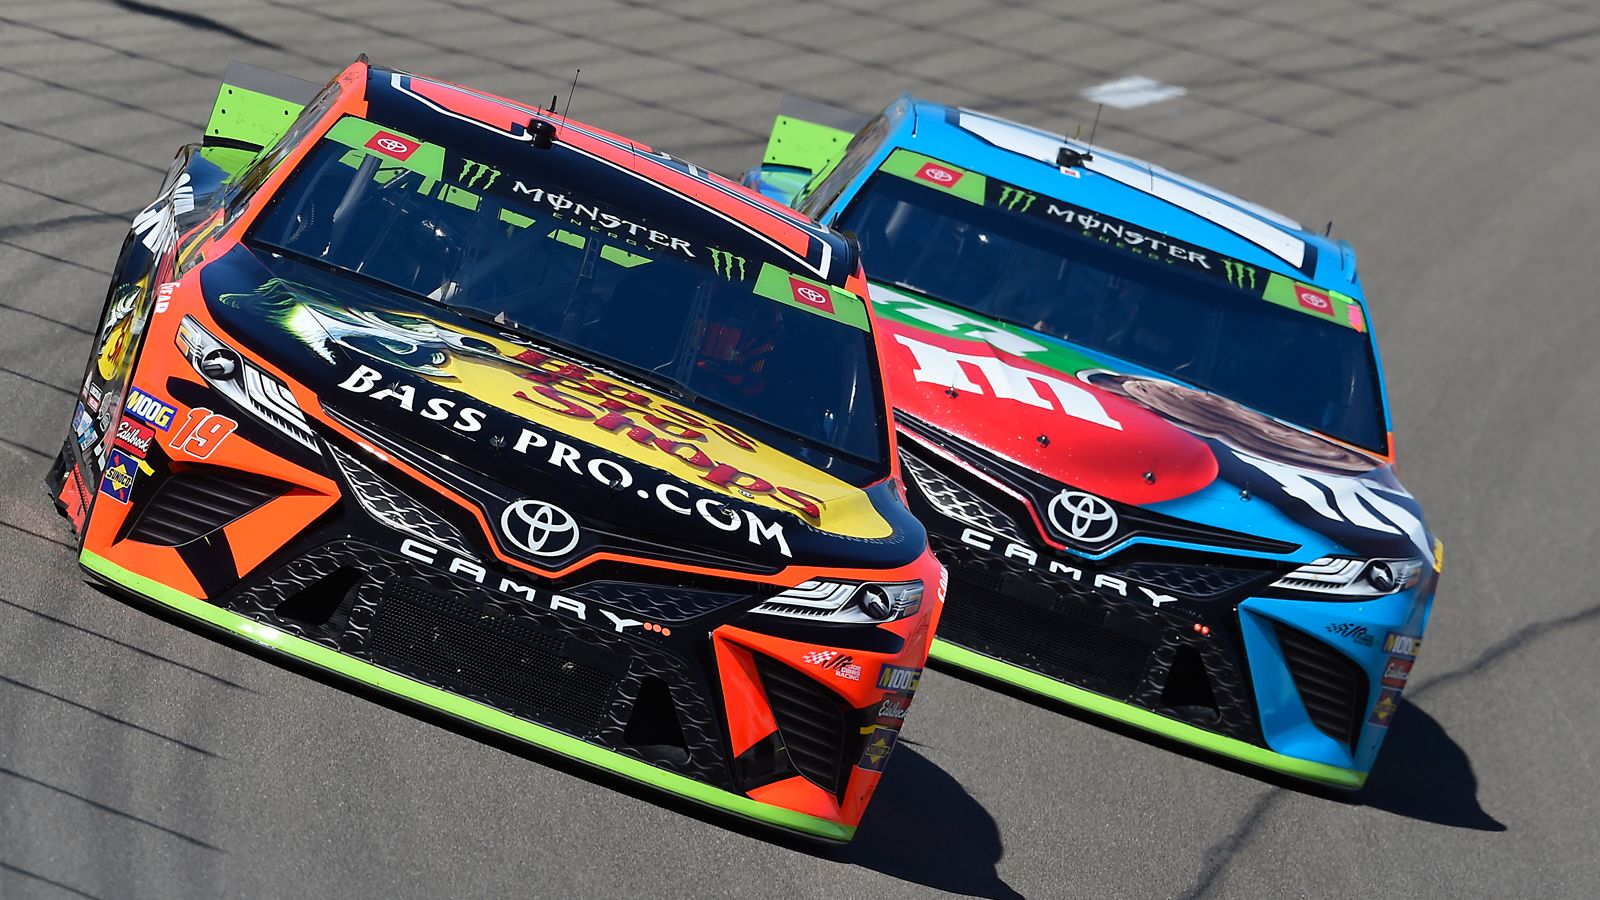 2020 NASCAR race schedule, TV and radio listings